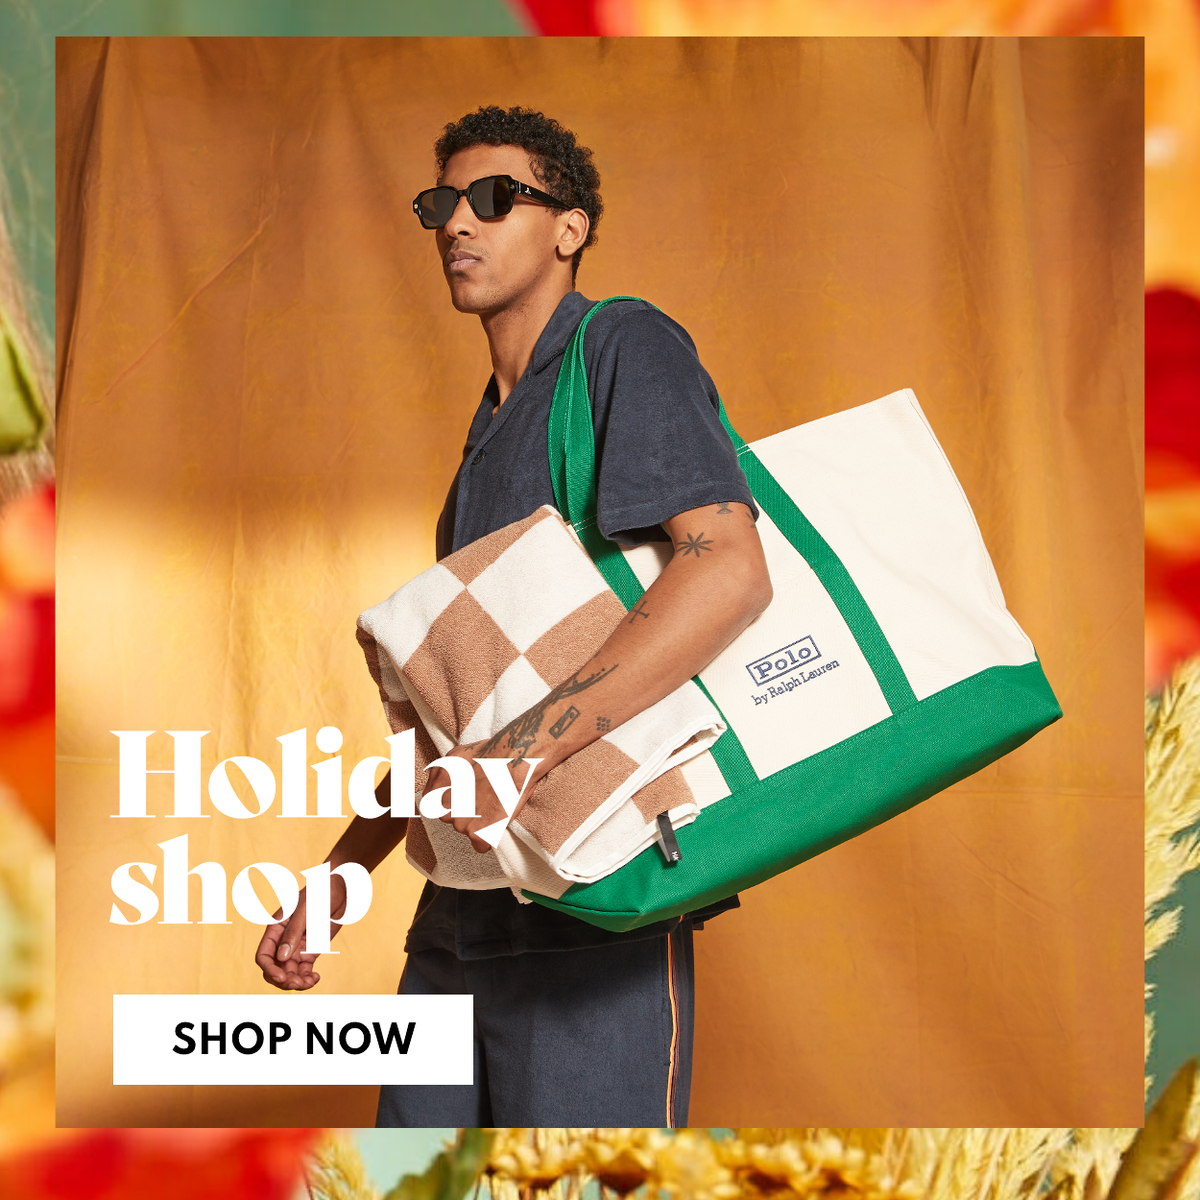 Holiday shop Shop now